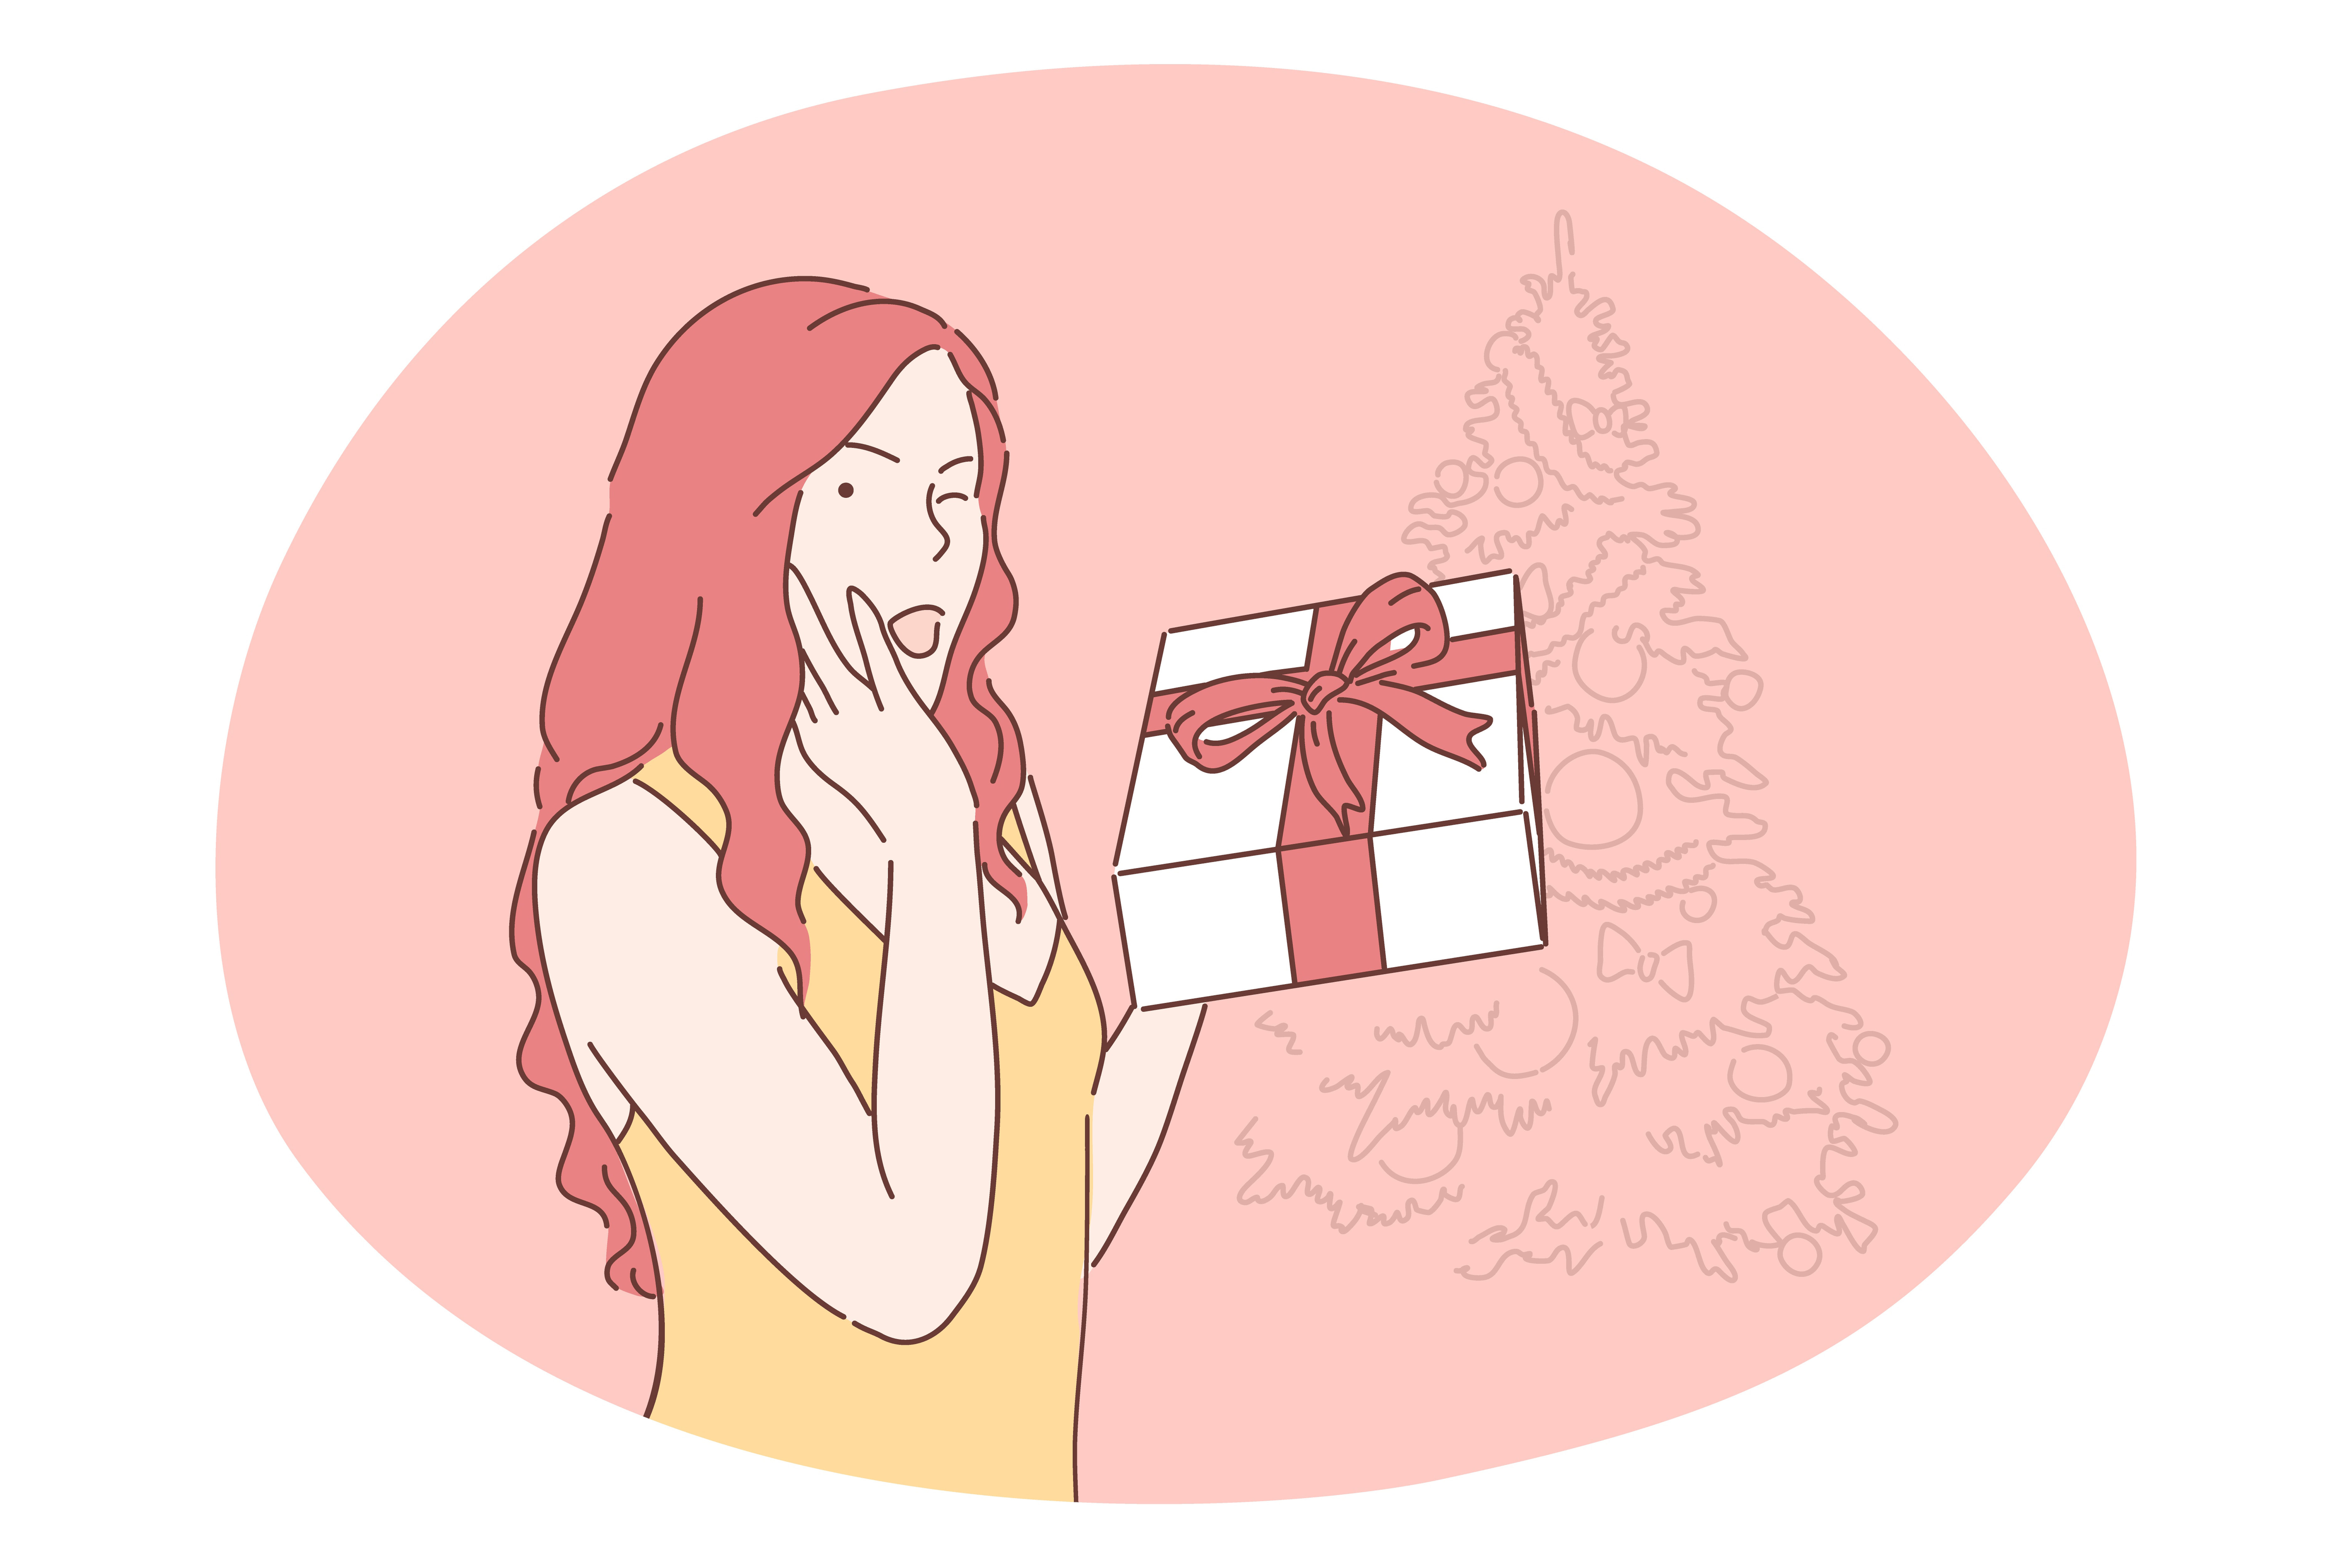 Christmas present, gift, celebration of New Year and winter holidays concept. Smiling young woman cartoon character feeling surprised and anticipating opening box with holiday Christmas present . Christmas present, gift, celebration of New Year and winter holidays concept